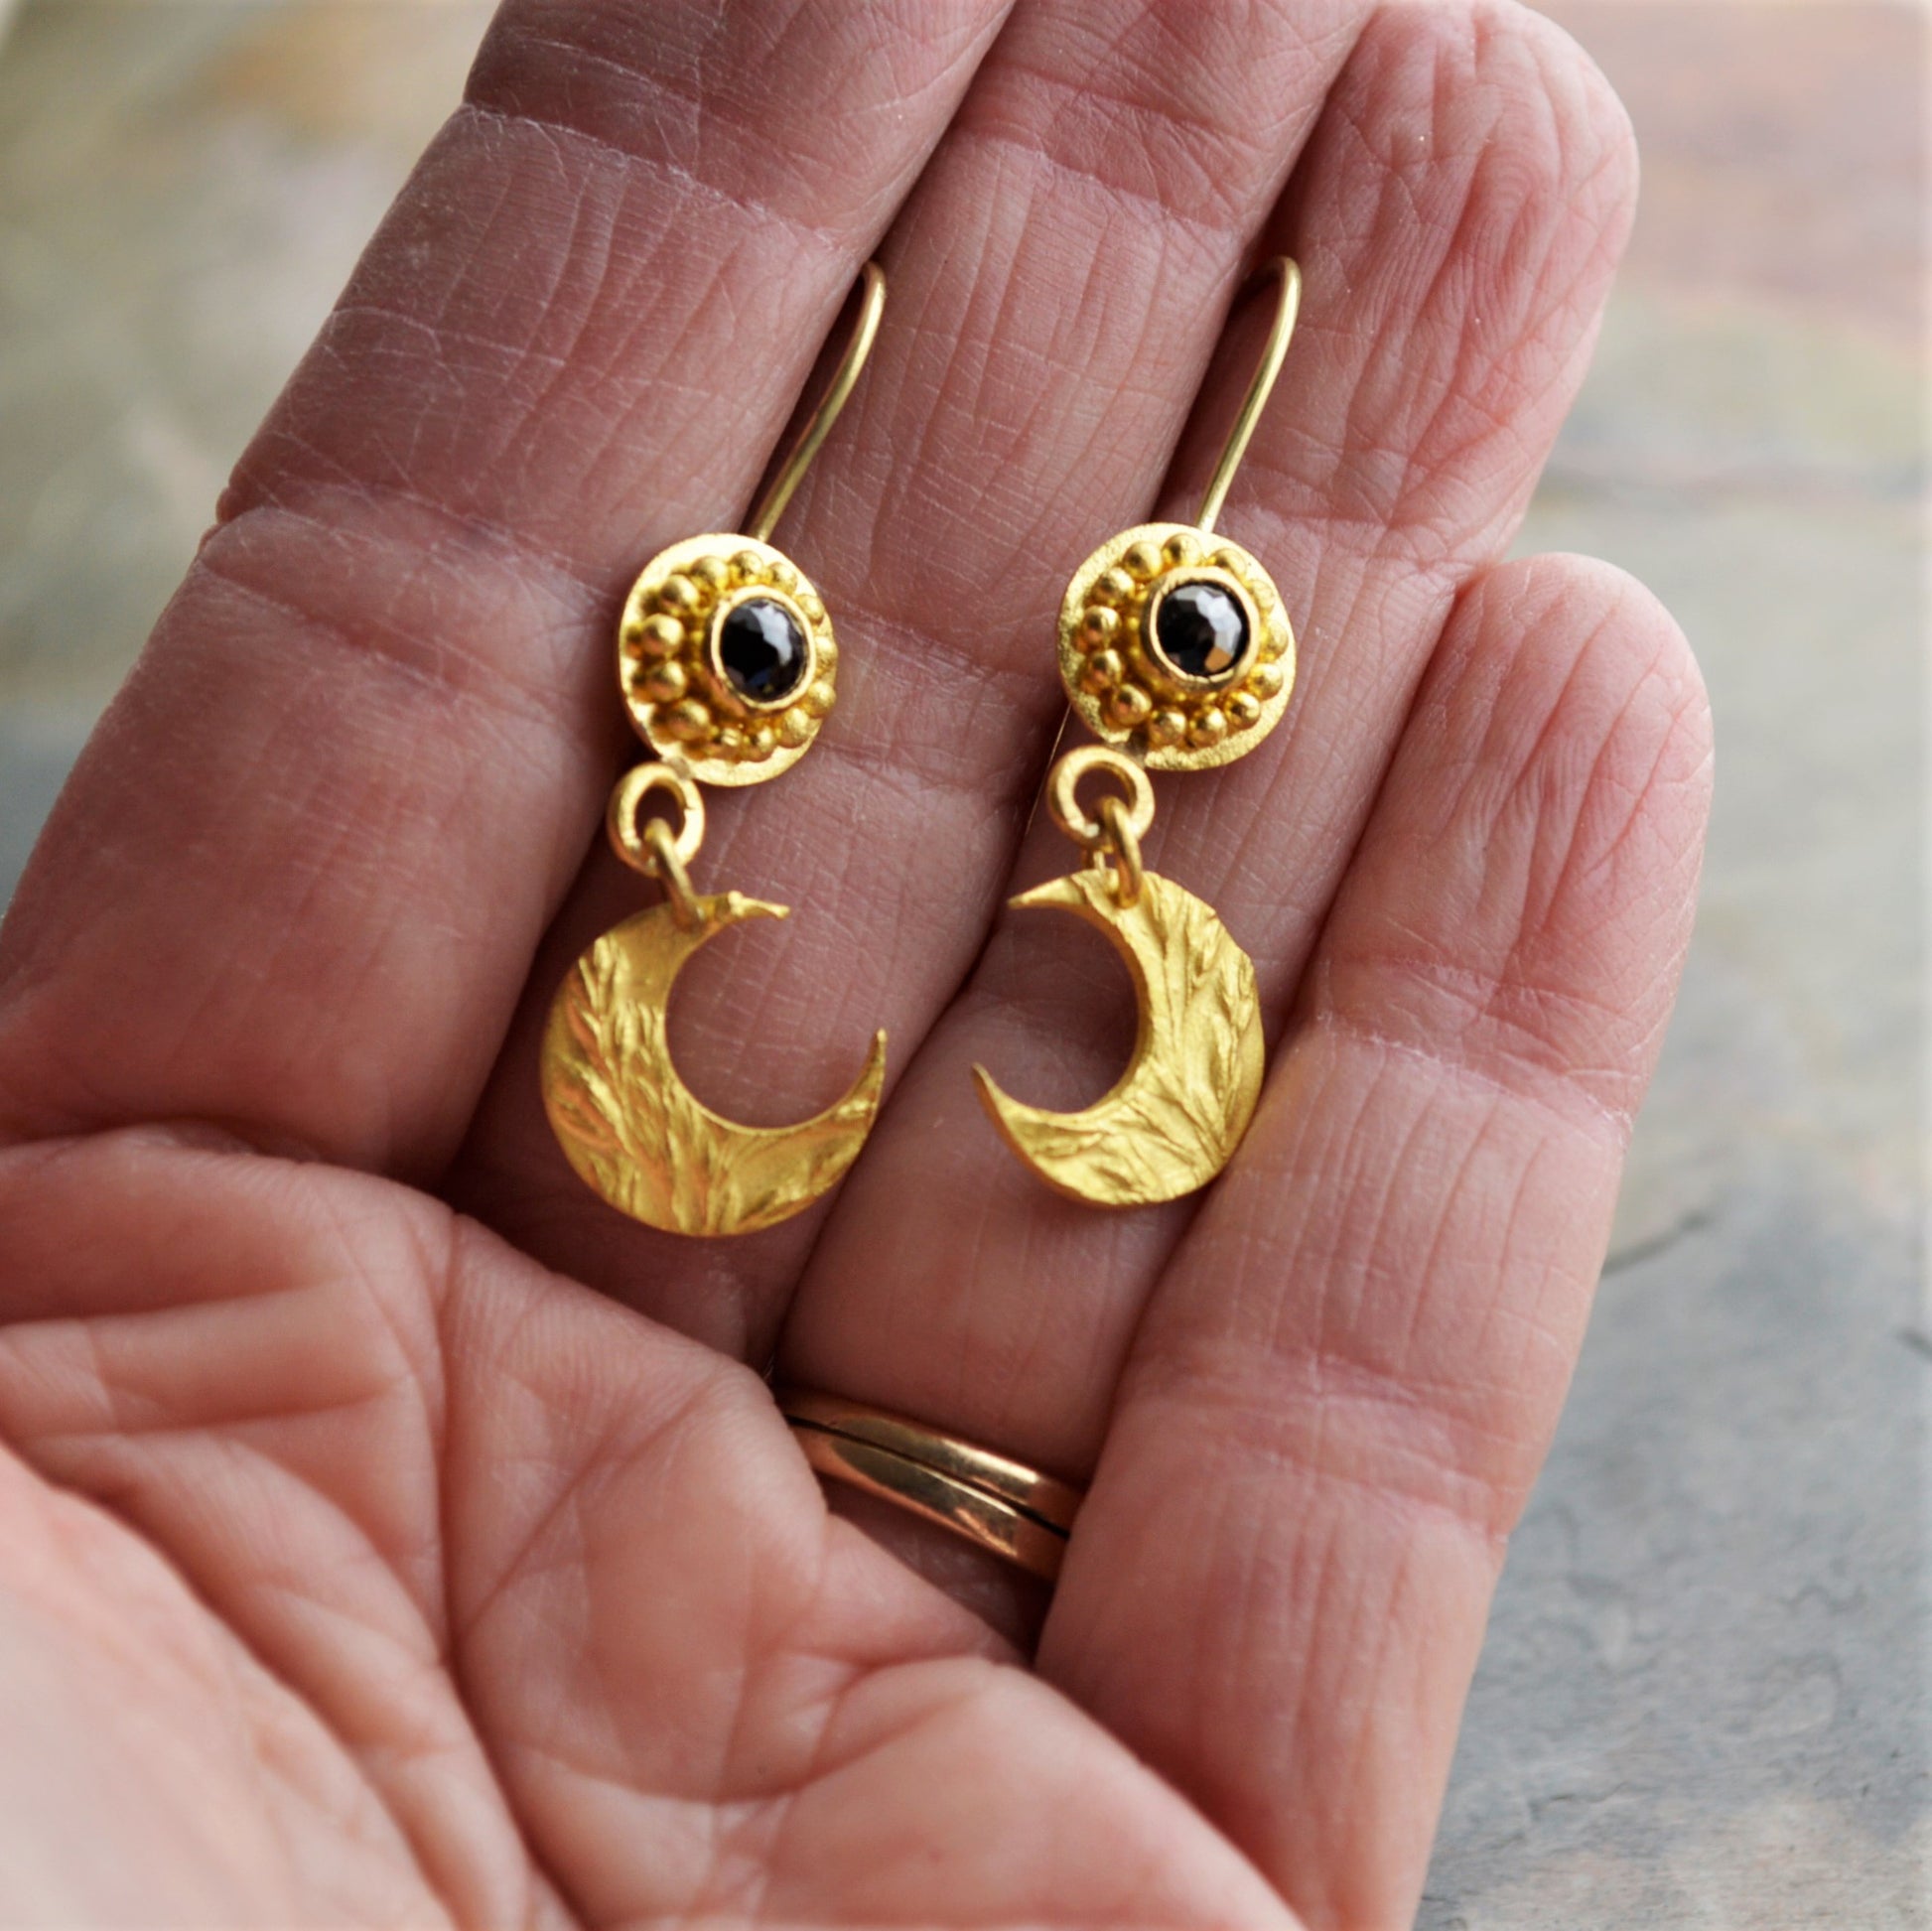 22k Gold and Black Diamond Earrings with Kentucky Bluegrass Moons - Gayle Dowell